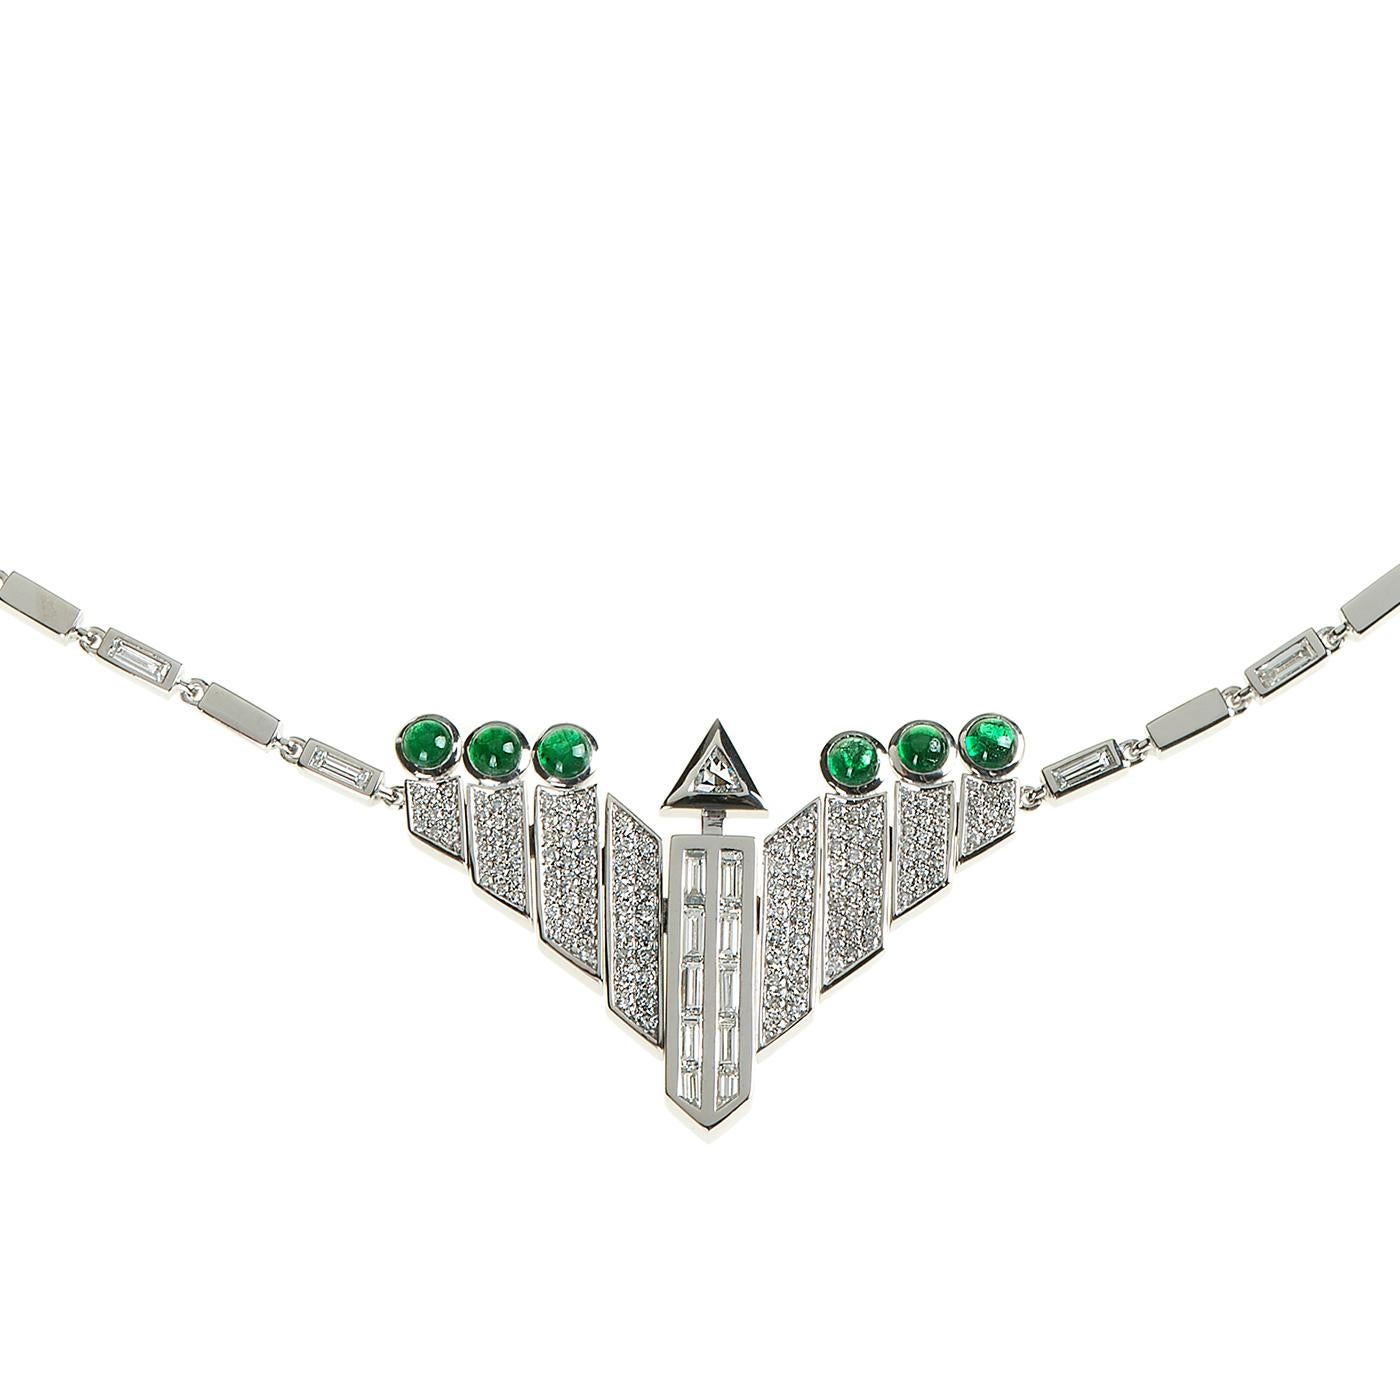 Nikos Koulis Universe line K18 white gold necklace with 1.23 cts white diamond baguettes, 0.86 cts white diamonds, 0.10 cts trillion white diamonds, 1.05 cts emeralds